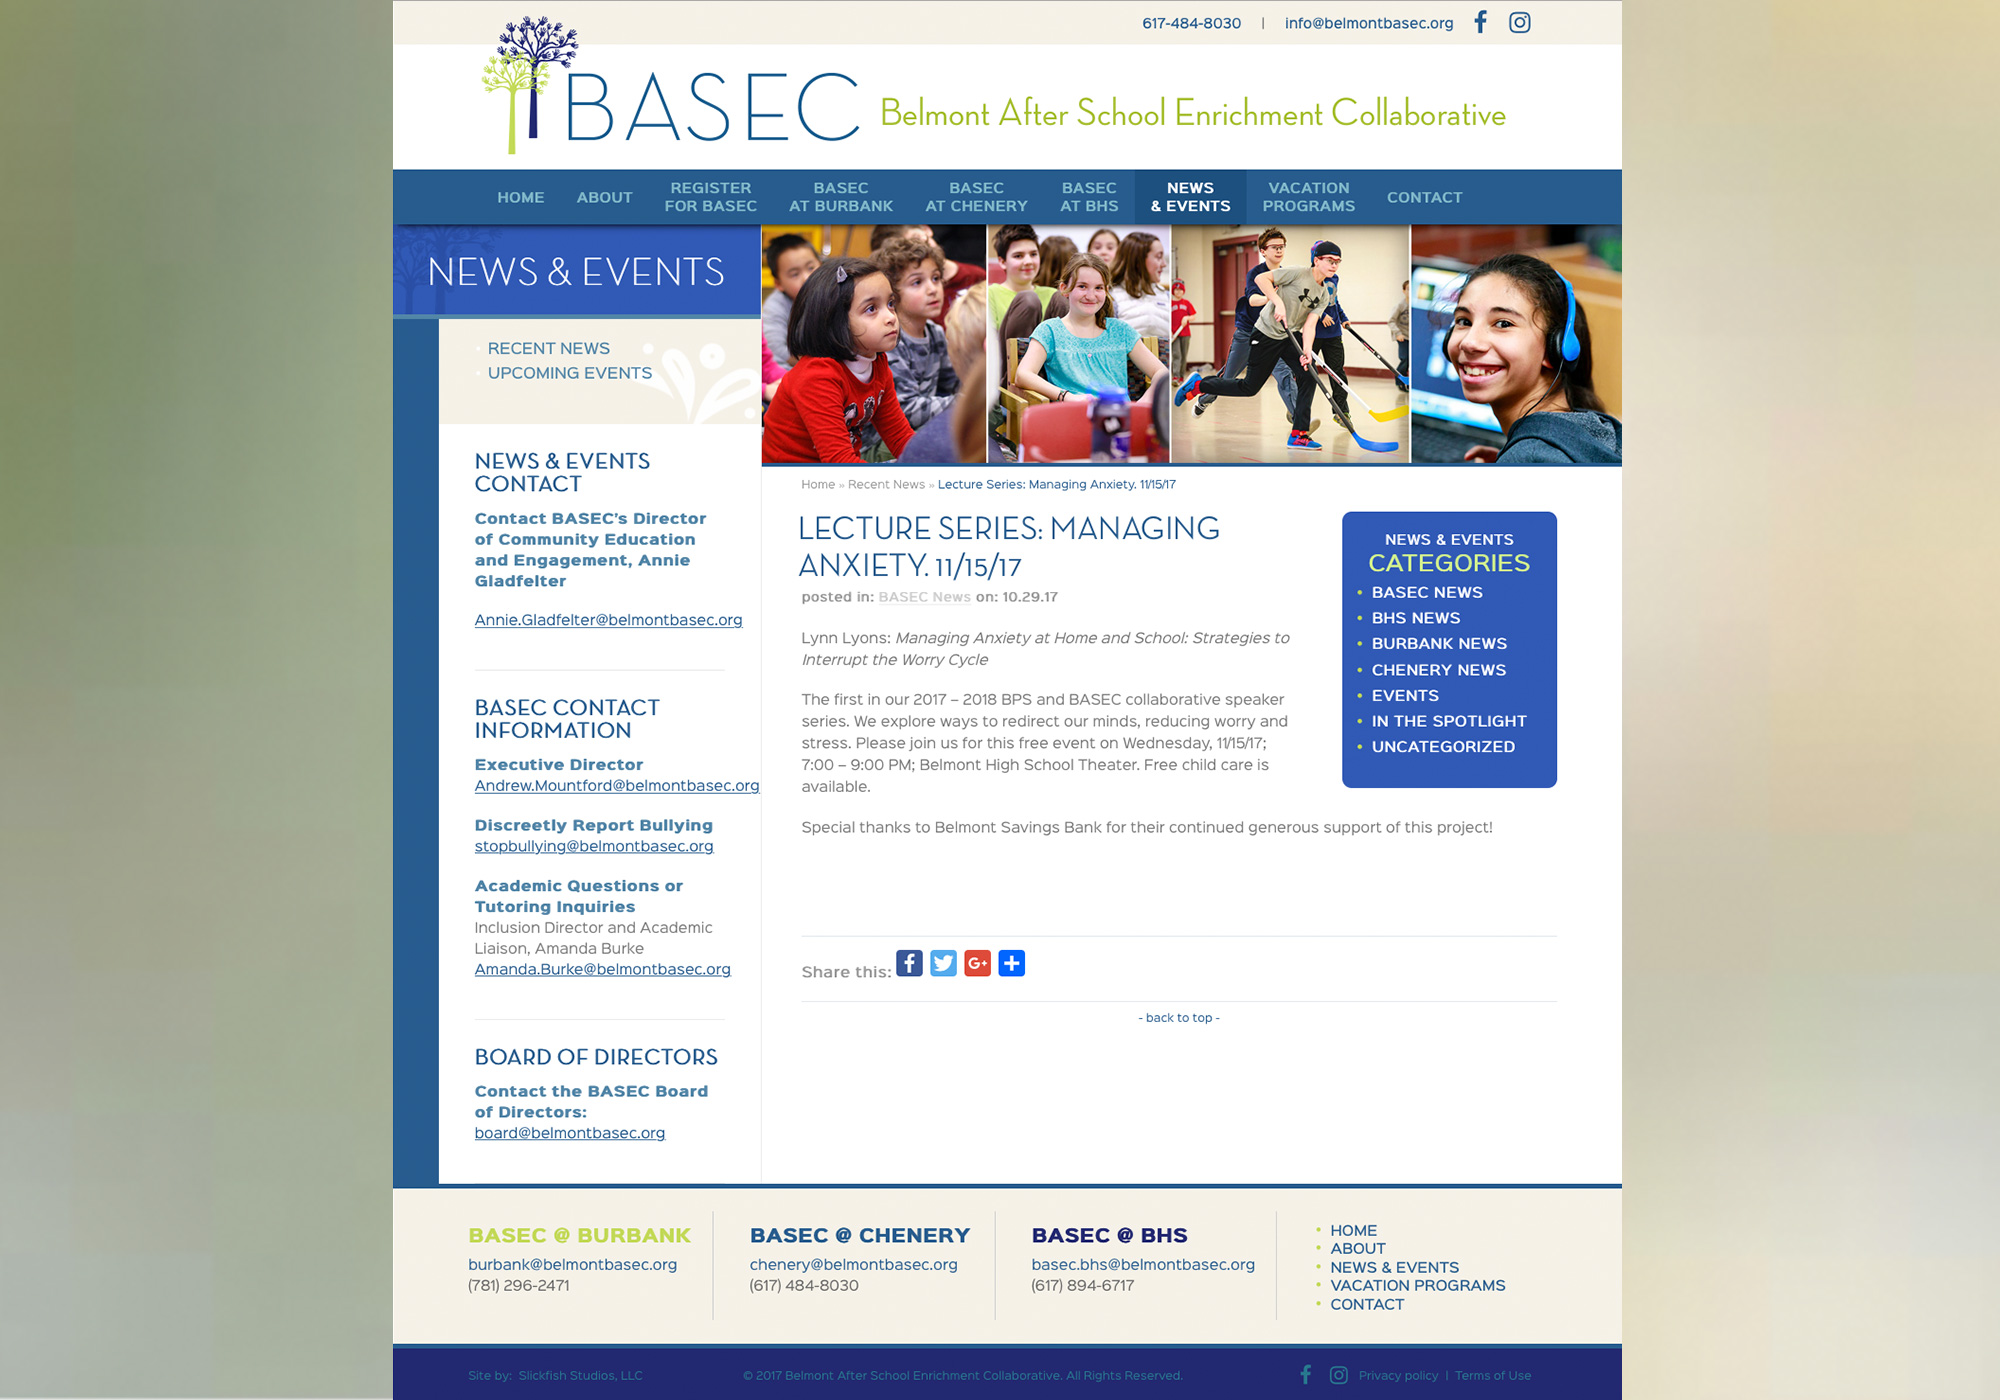 There's a lot going on at Belmont BASEC in Massachusetts! Find out what on their News & Events blog programmed by Maine design company, SlickFish Studios.